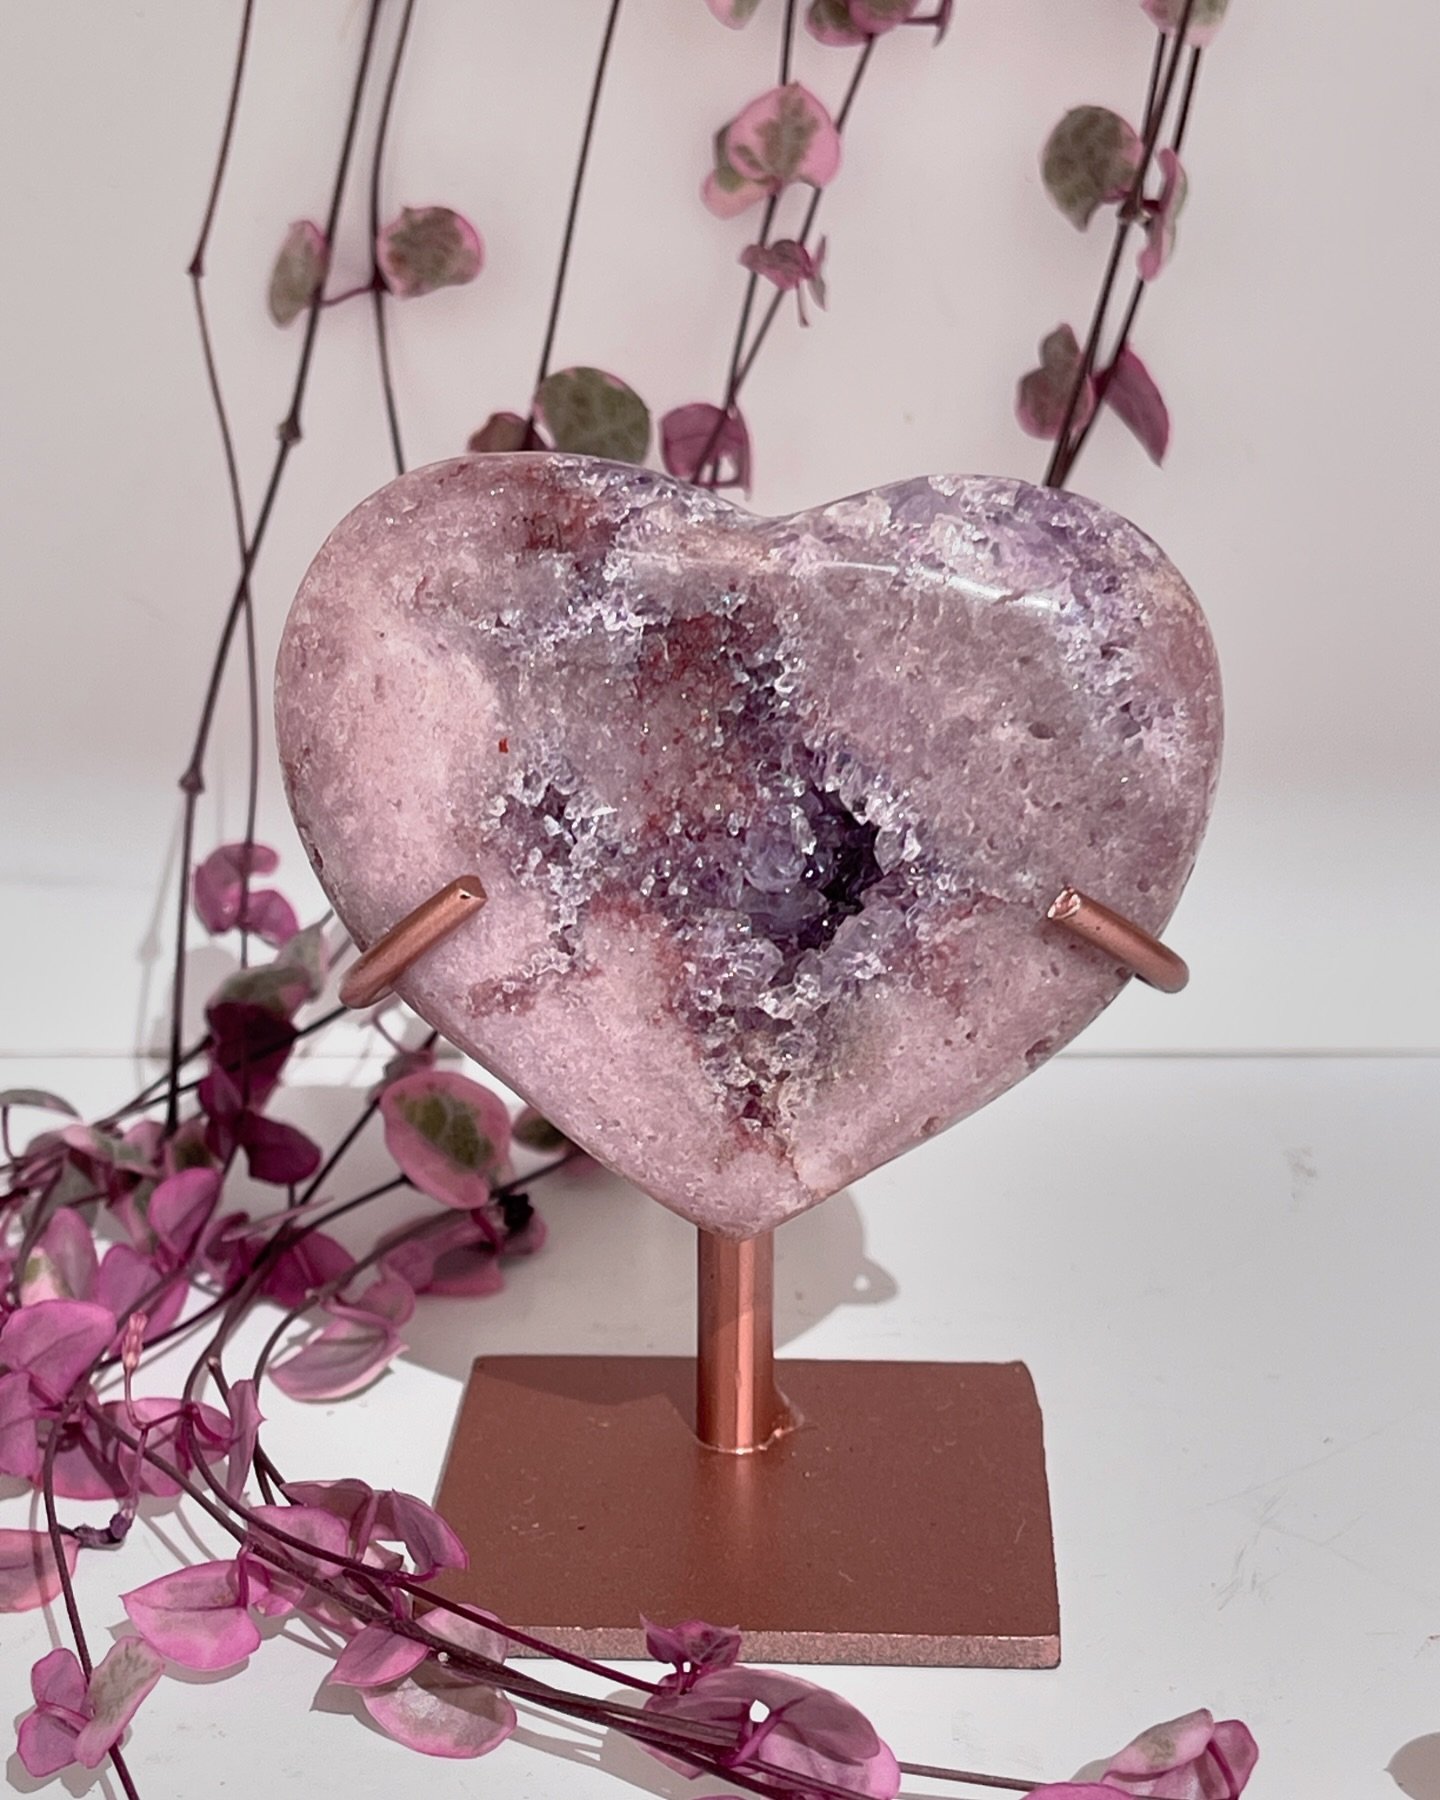 Here&rsquo;s a corrected version:

&ldquo;How cute is this lovely PA heart? 💜

Check out our website tonight for the upload of new arrivals; you will find hard-to-find treasures there!

.

.

.

#pinkamethysthearrt #pinkamethyst #crystalvibes #cryst